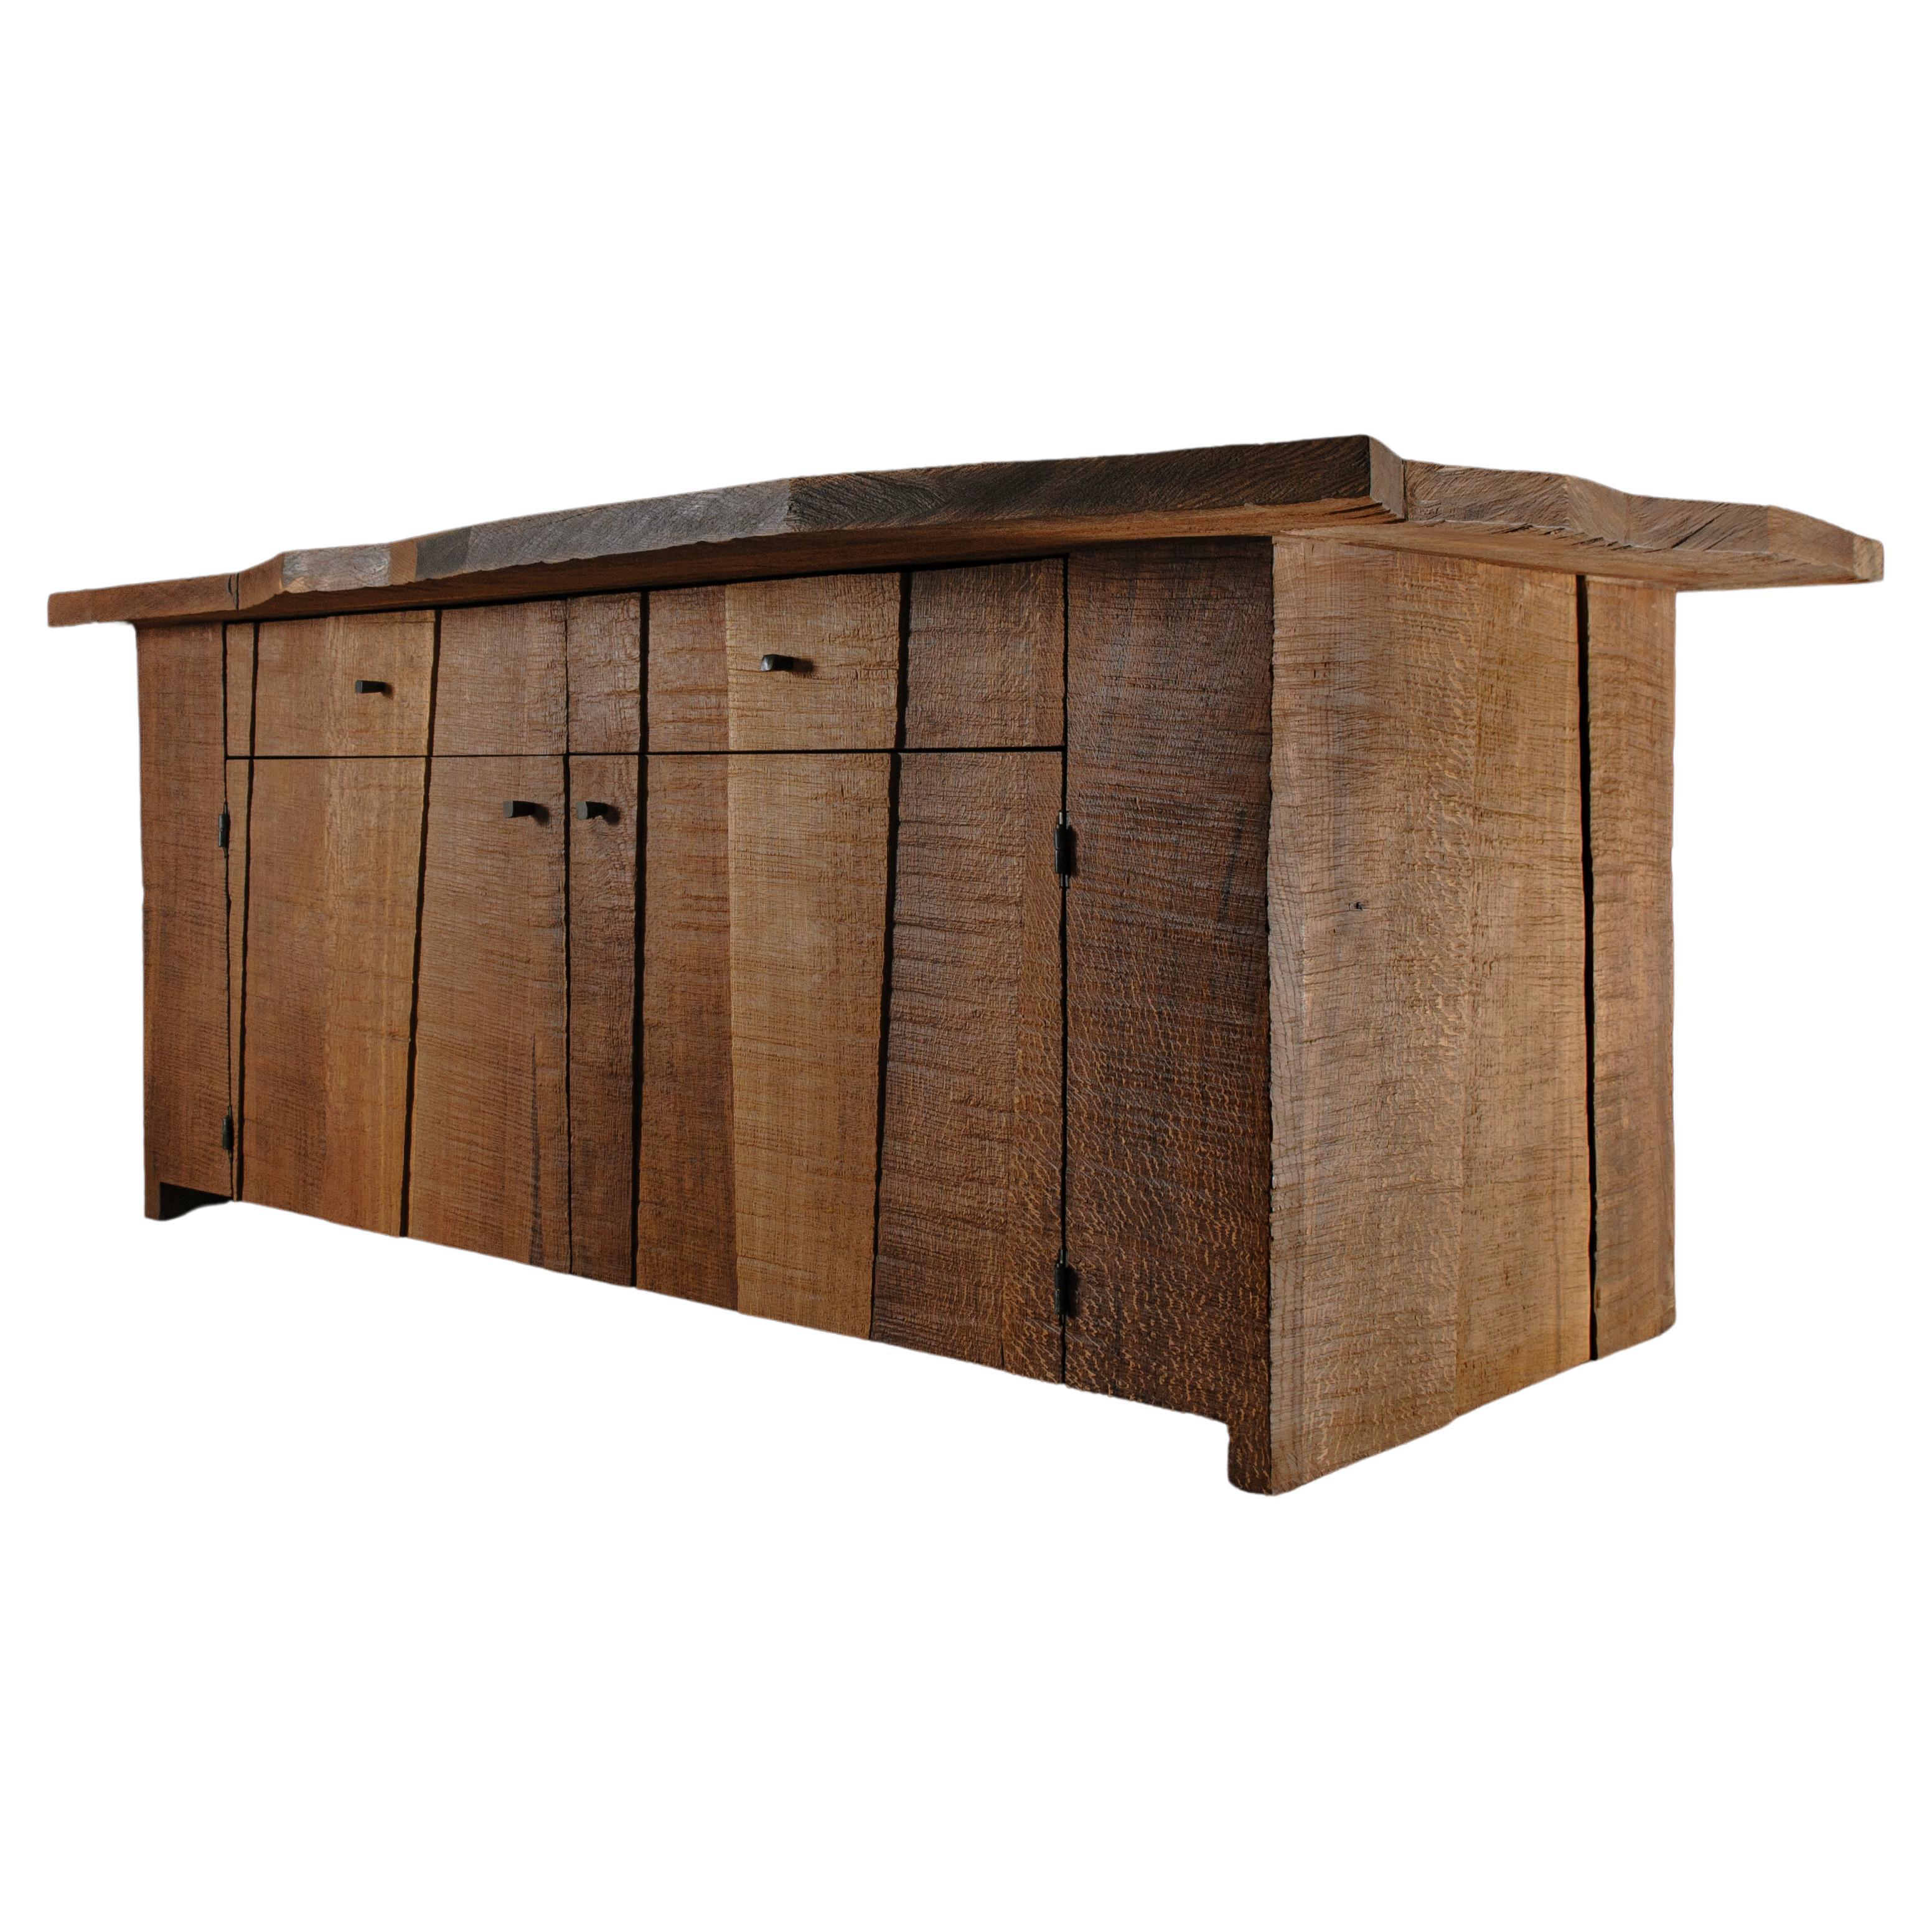 Wardrobe made of solid oak (+ linseed oil)
Measures: H. 77 x 170 x 60 cm

SÓHA design studio conceives and produces furniture design and decorative objects in solid oak in an authentic style. Inspiration to create all these items comes from the